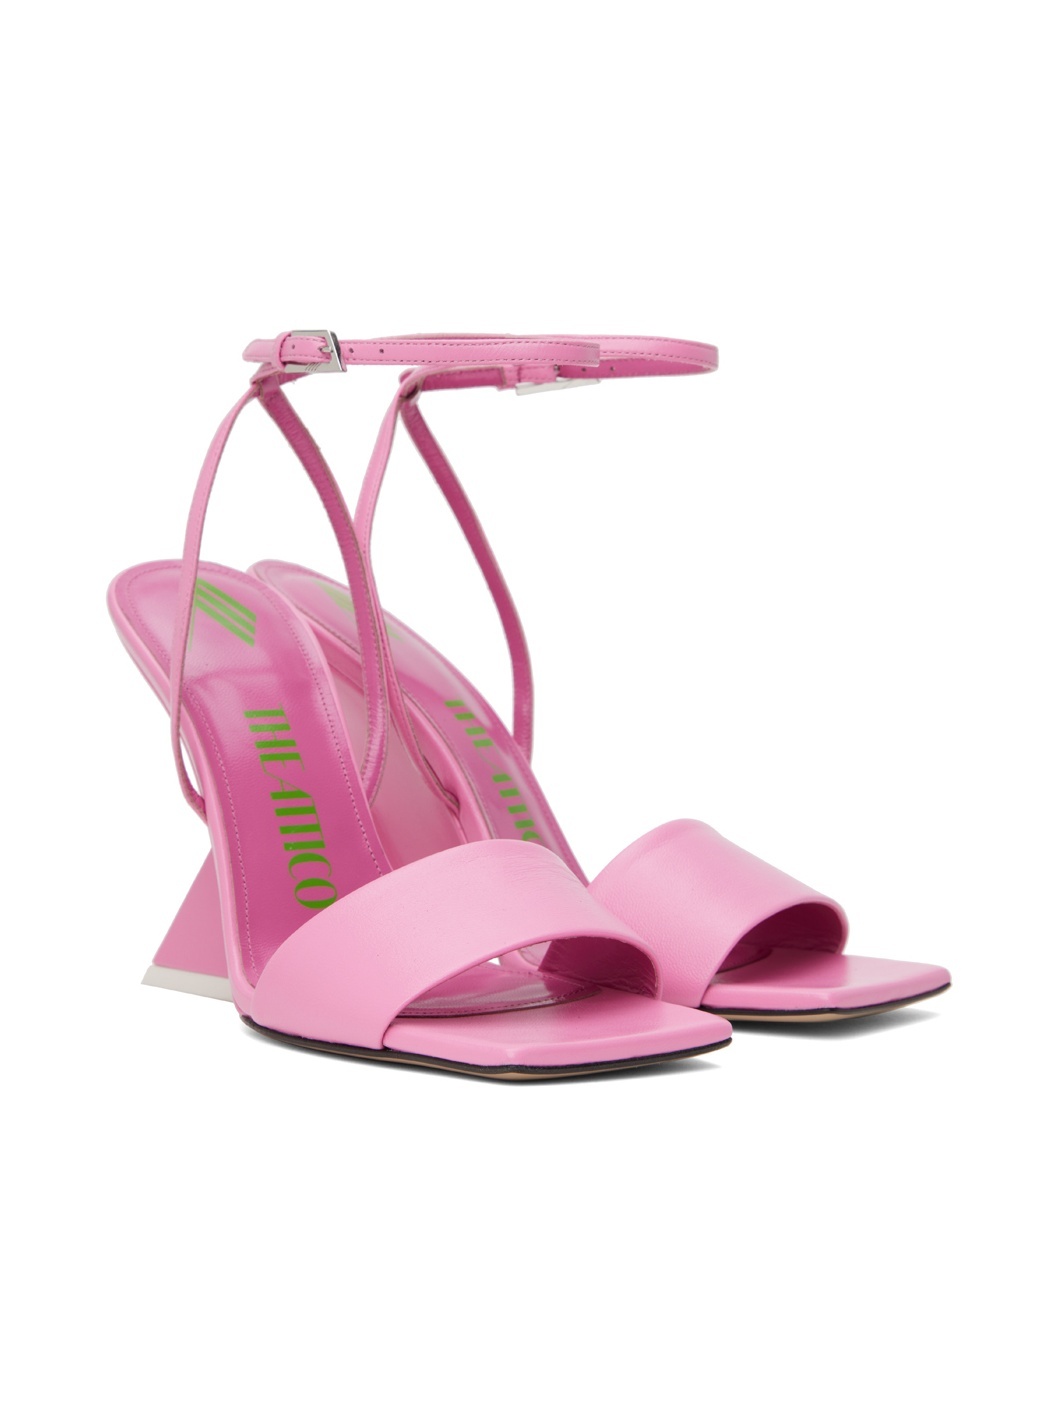 Pink Cheope Heeled Sandals - 4